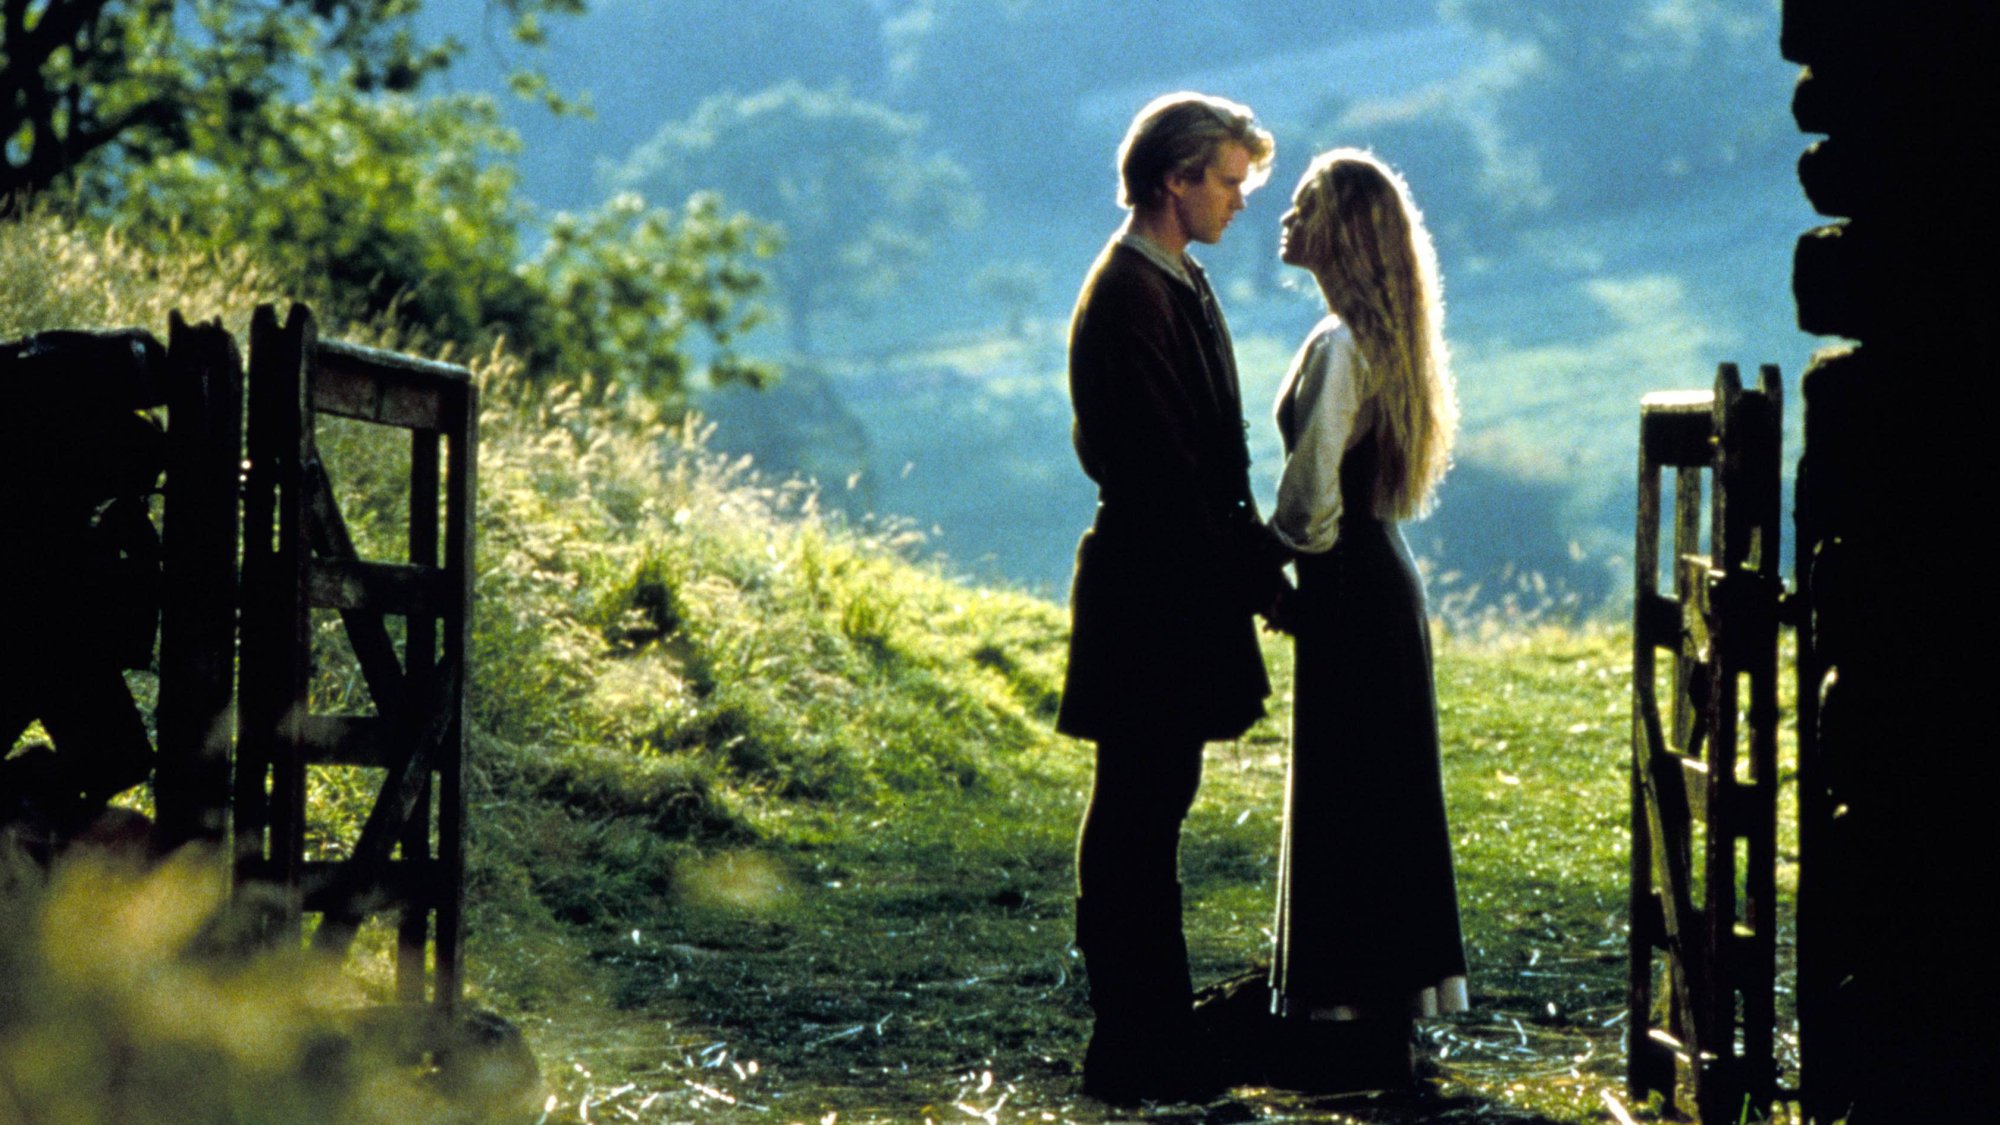 Princess Buttercup and Wesley share a moment in "The Princess Bride."